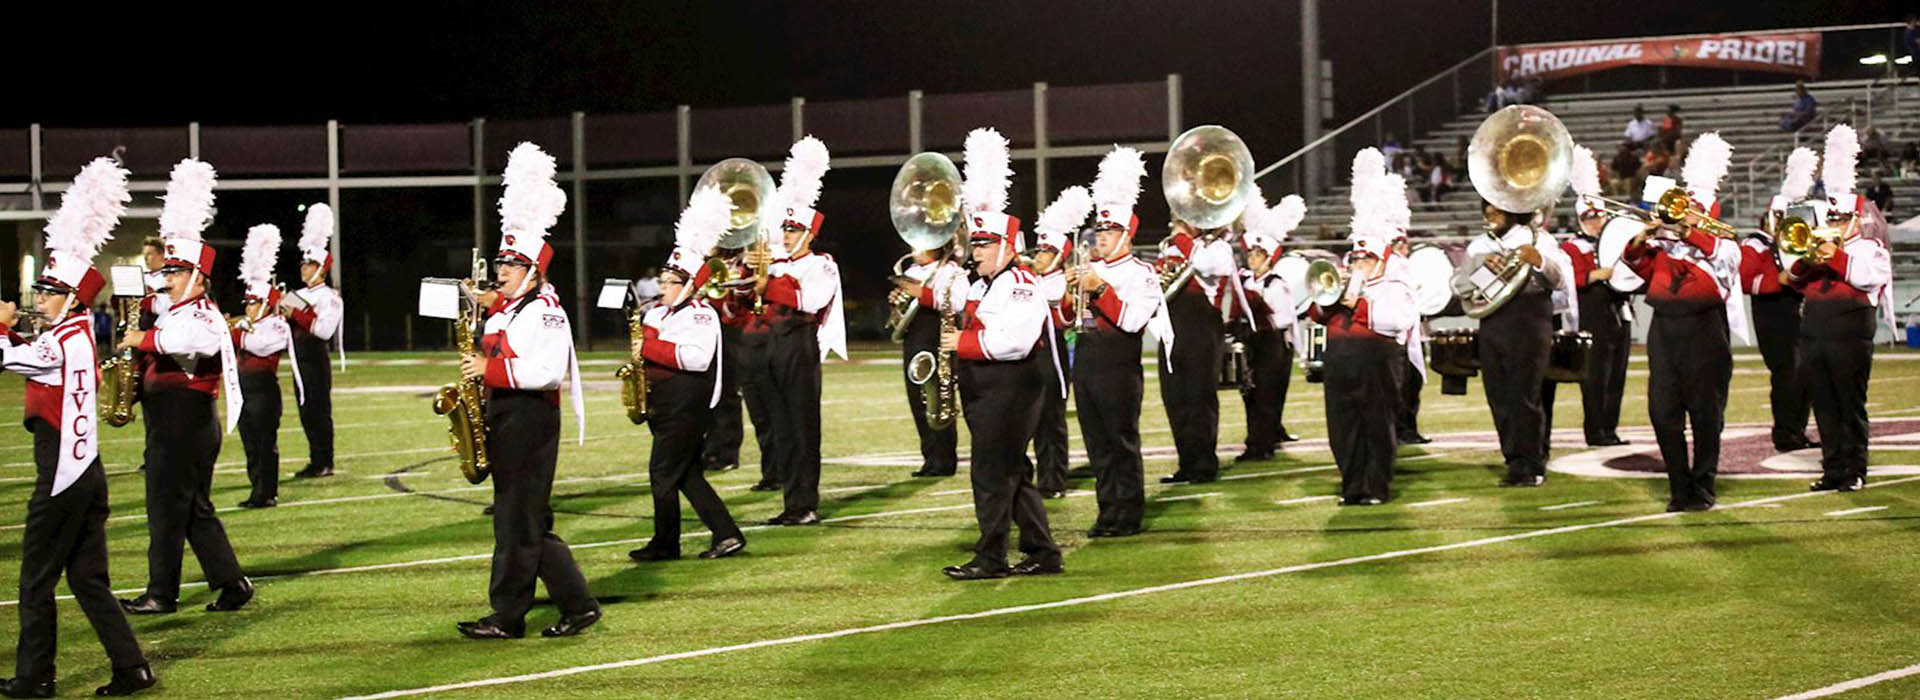 TVCC Marching Band